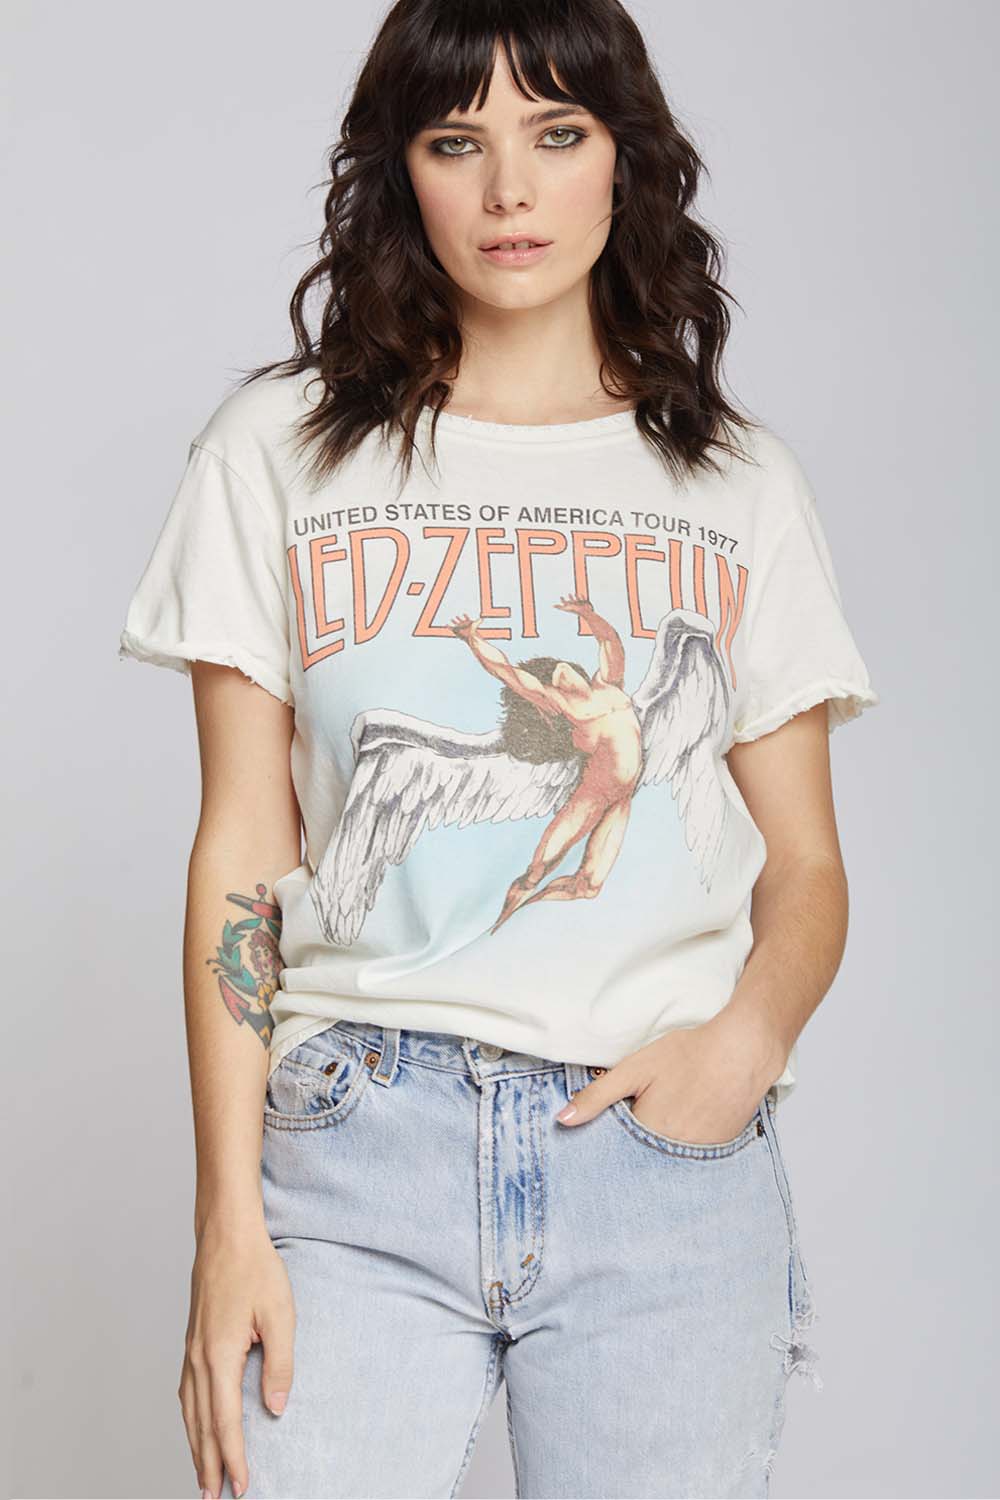 Led Zeppelin USA Tour 1977 Tee - Recycled Karma Brands